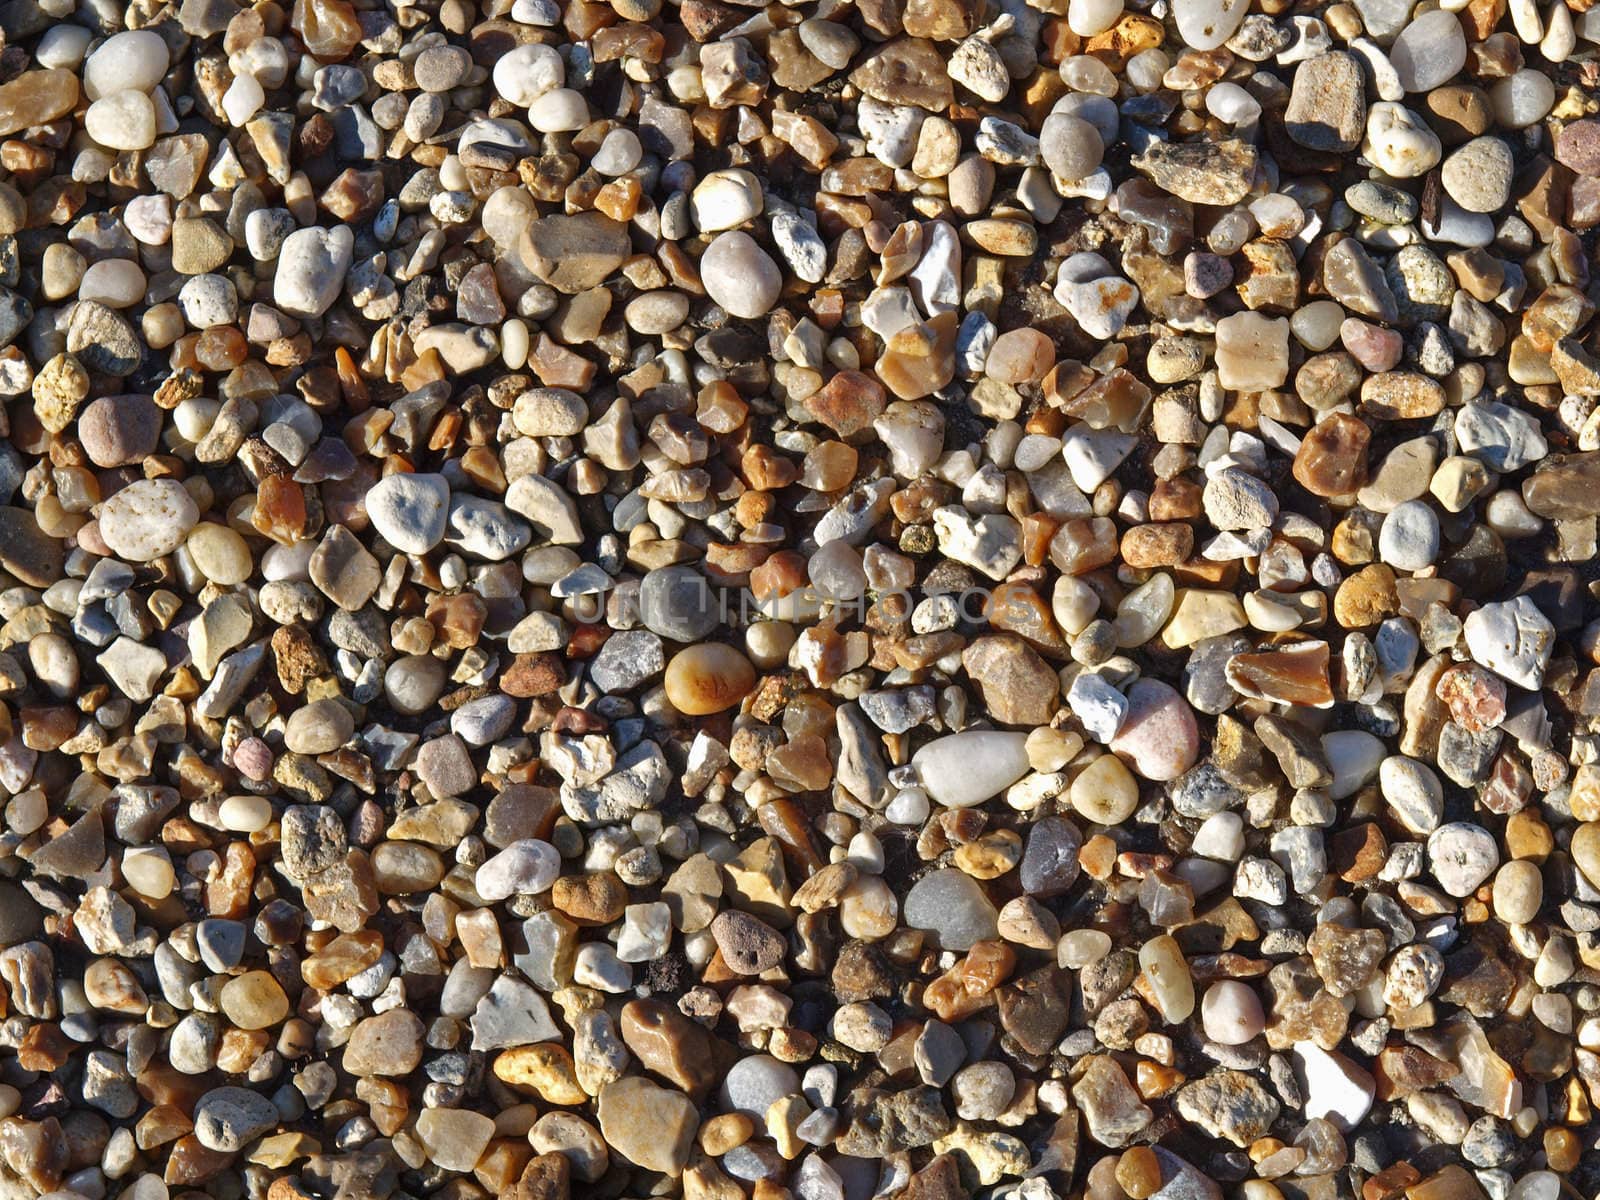 pebbles on the beach by Ric510